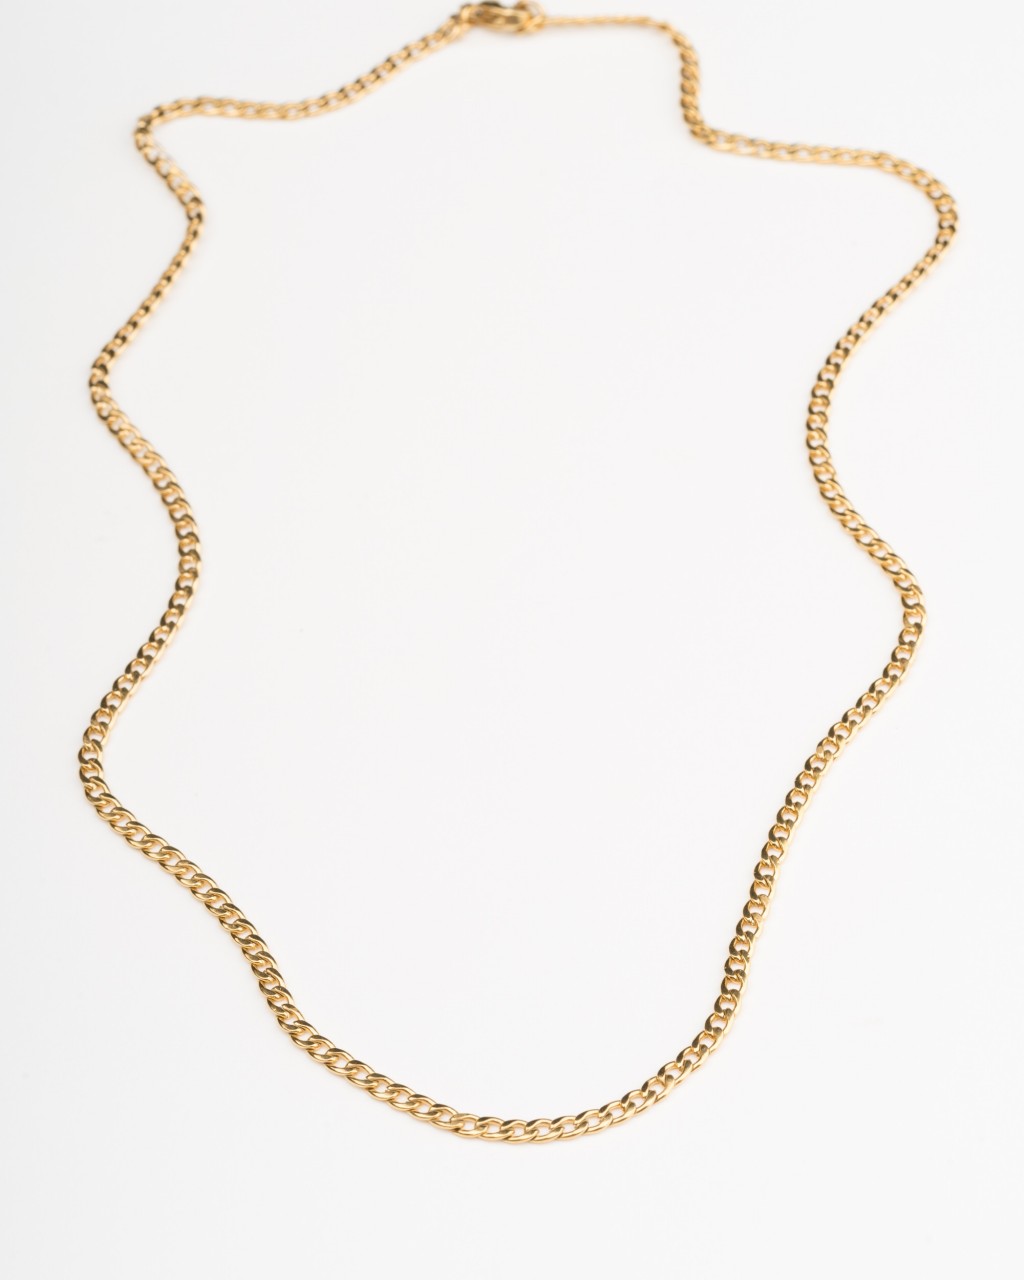 chain necklace, gold chains for women, silver chain necklace